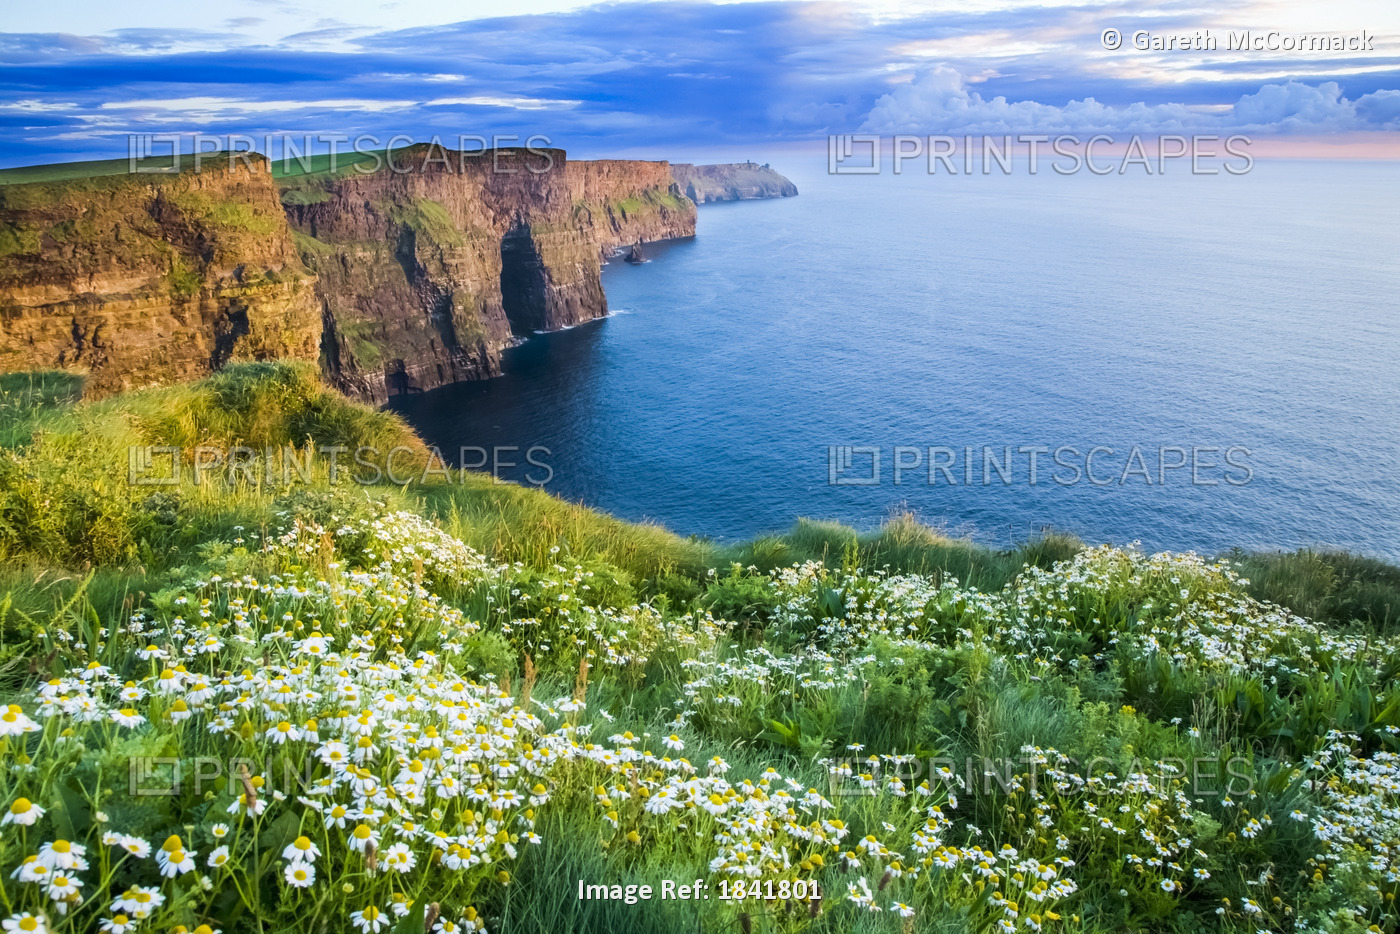 Cliffs Of Moher, Co Clare, Ireland; Summer Daisies Growing In Abundance On The ...